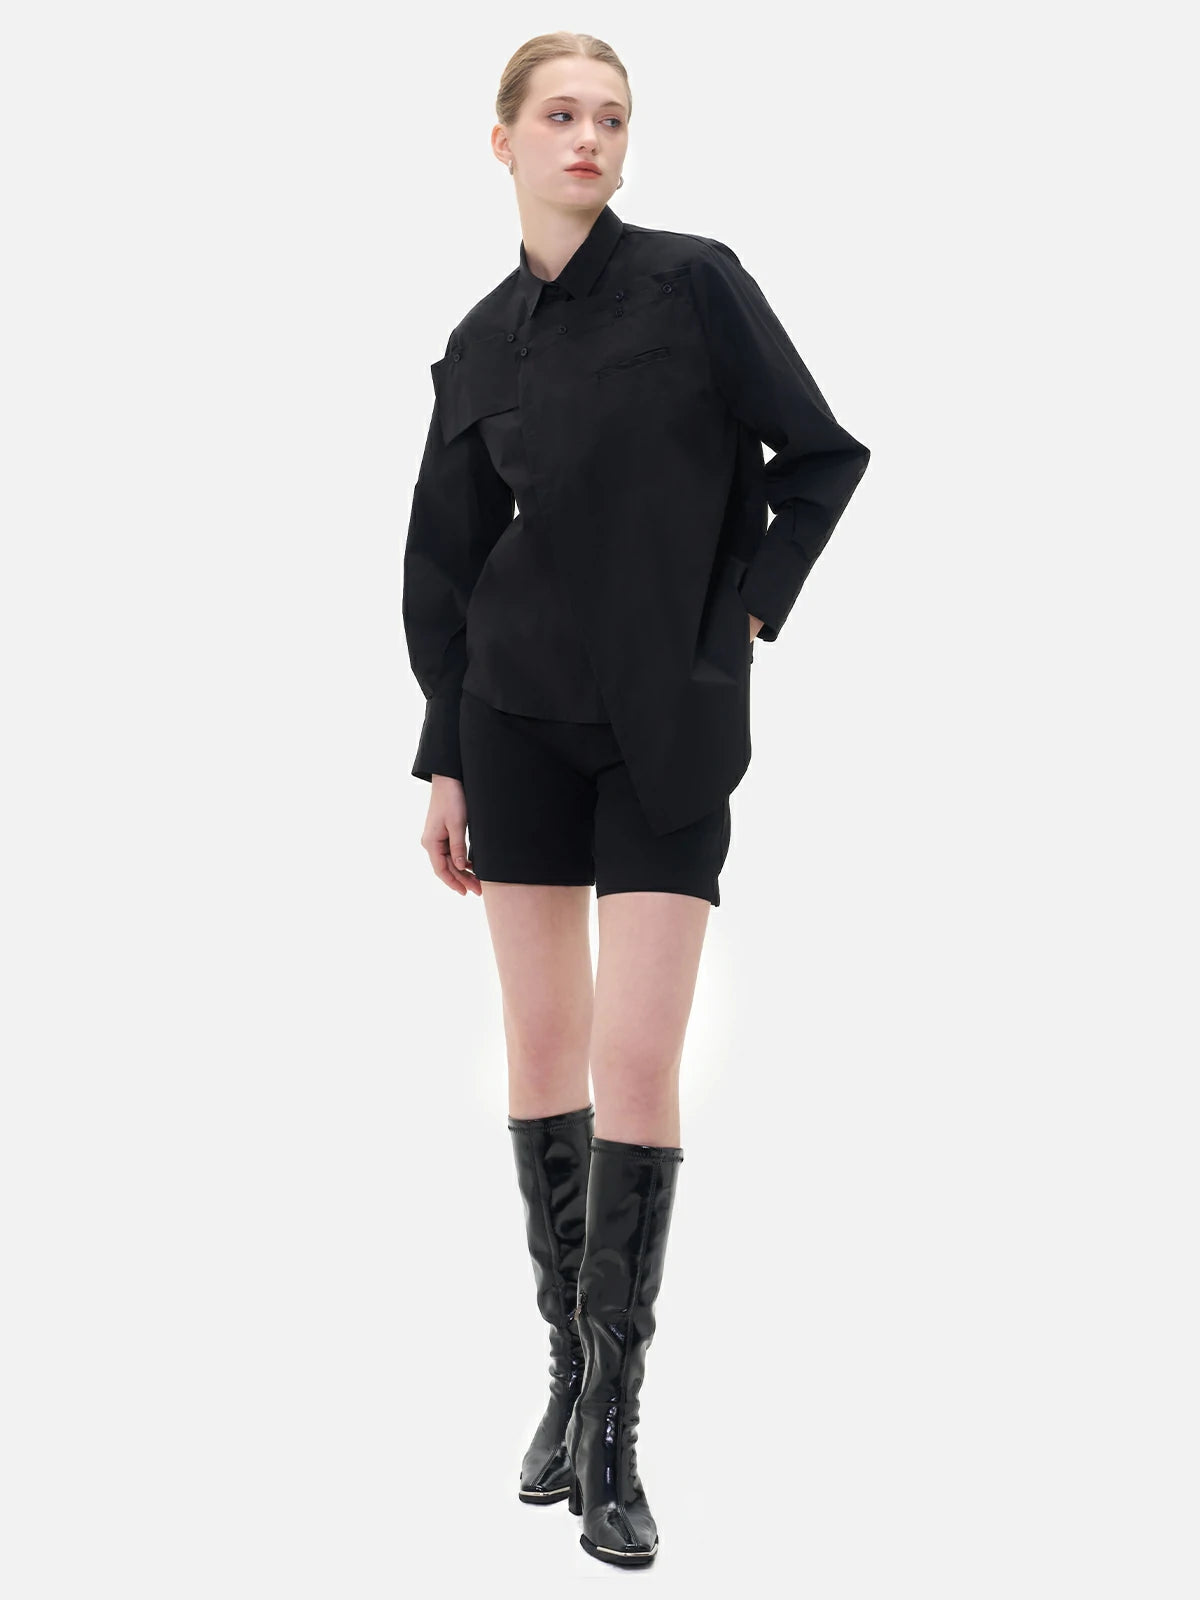 Comfortable and chic black shirt designed with a chest panel, effortlessly combining fashion and ease for everyday wear.